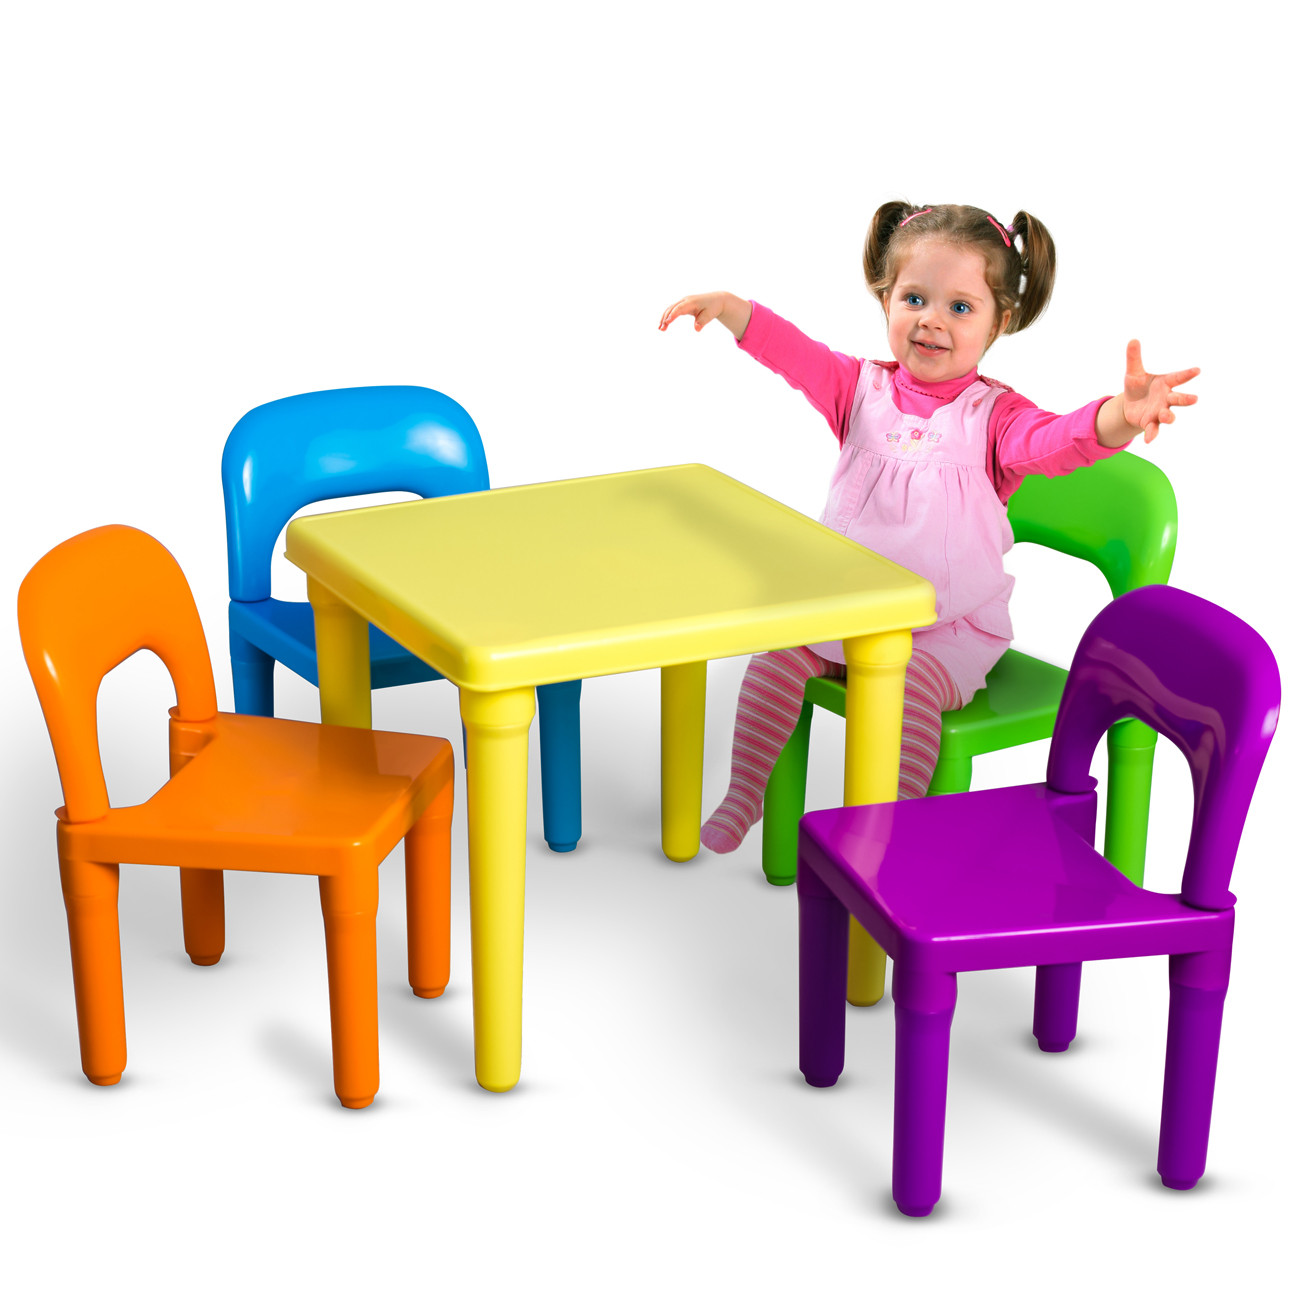 Kids Desk Table
 Kids Table and Chairs Play Set Toddler Child Toy Activity